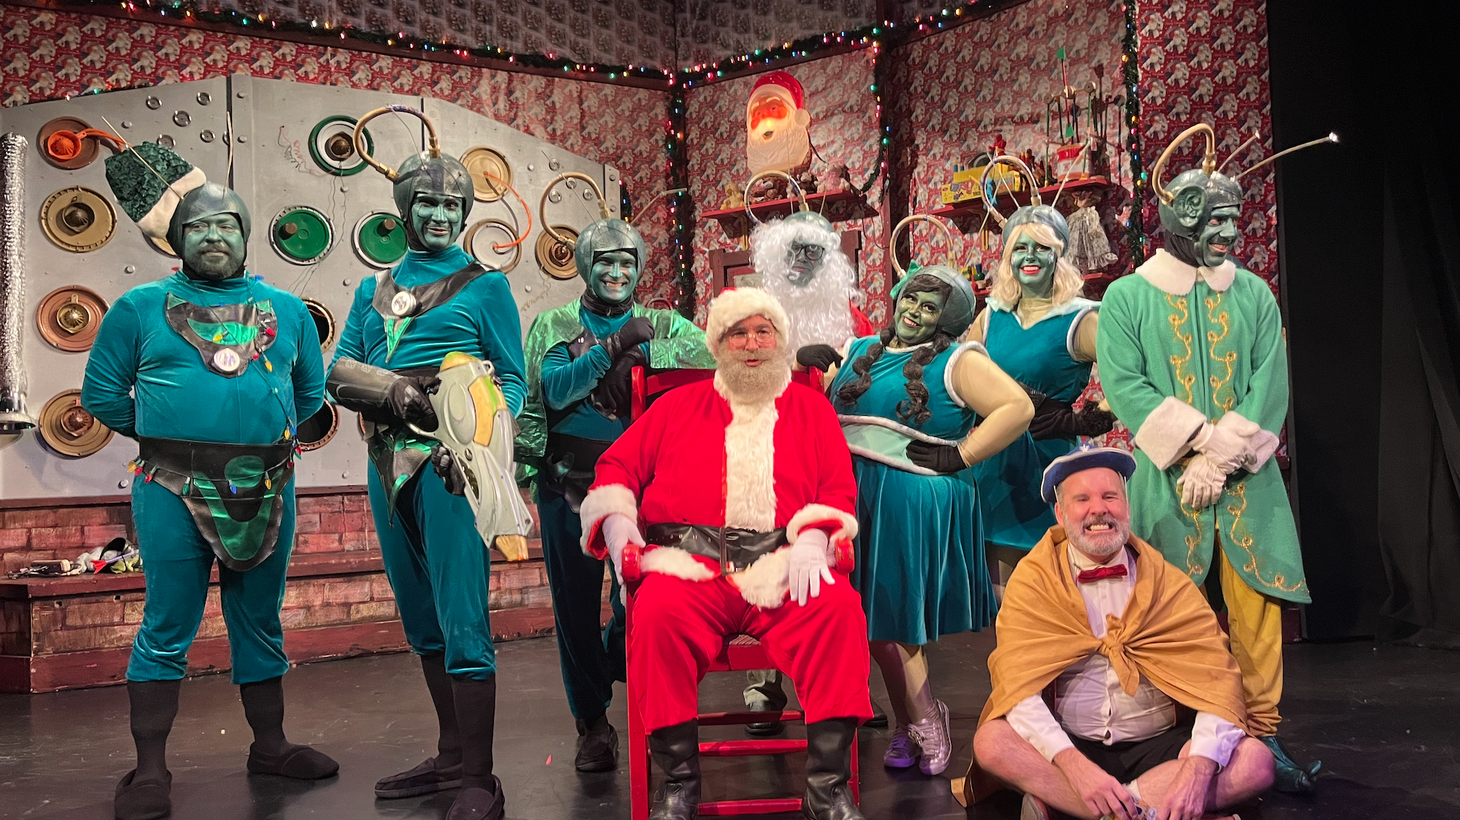 The 2023 cast of “Santa Claus Conquers the Martians” at the Maverick Theater in Fullerton